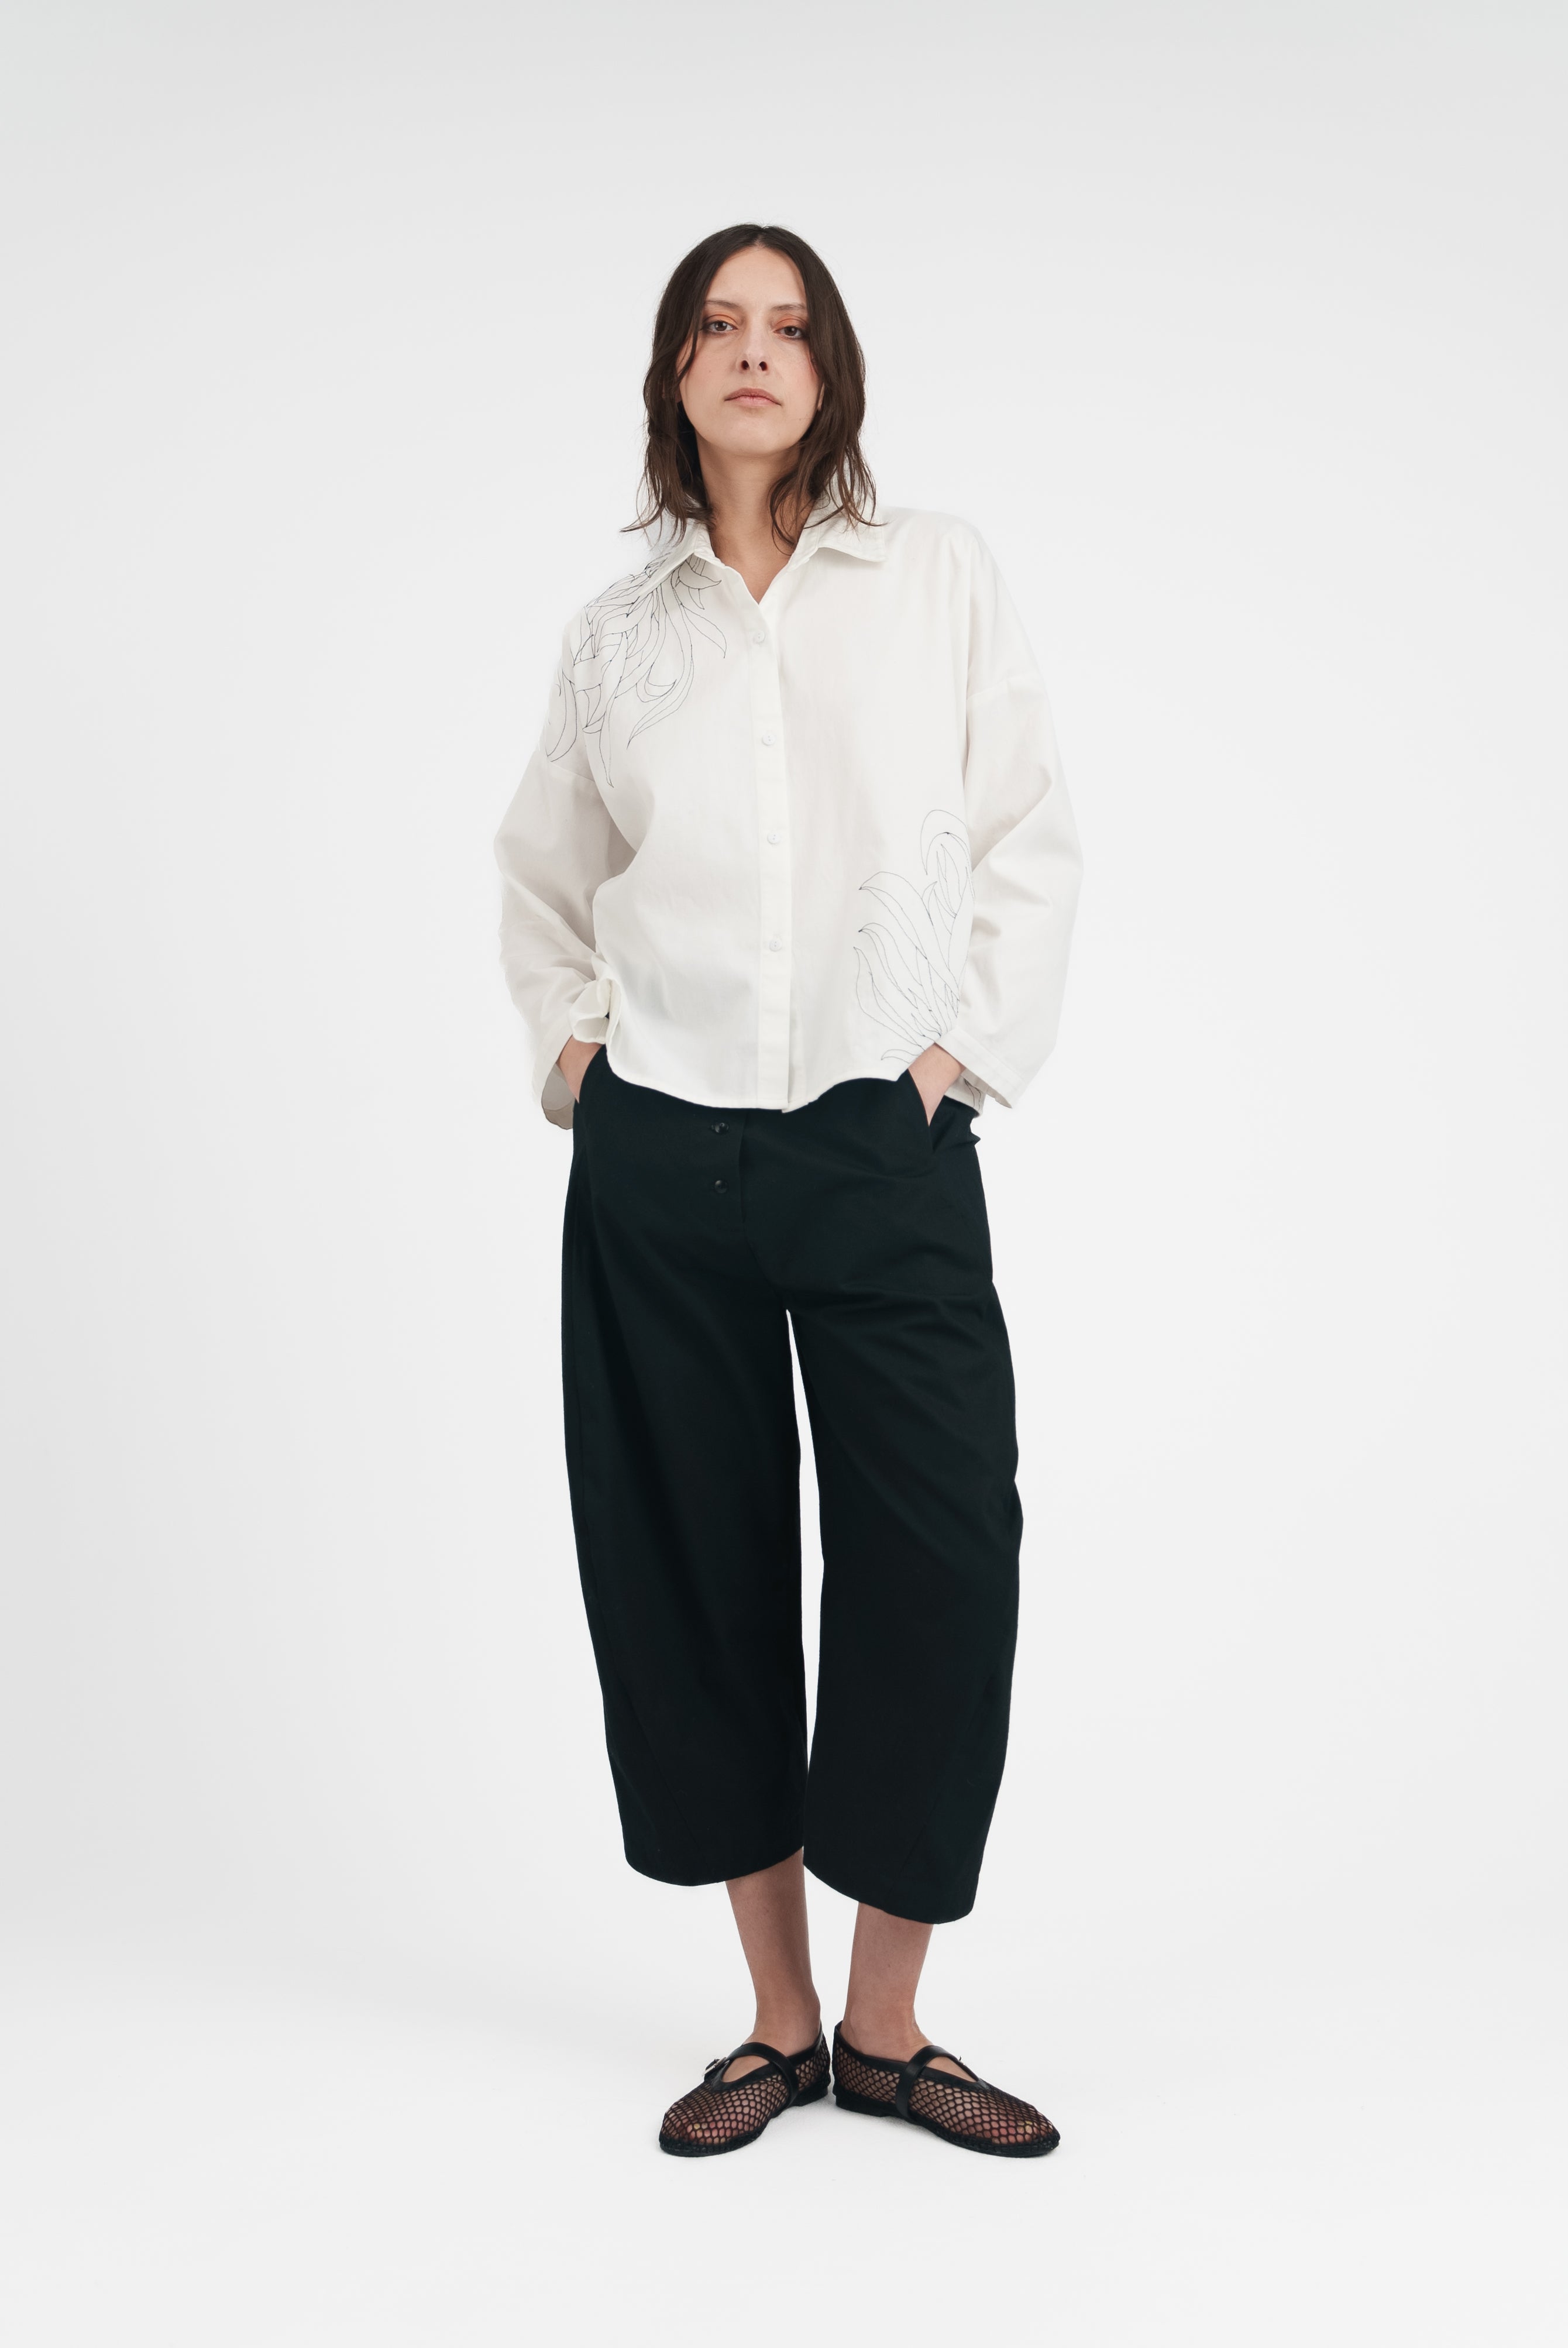 Beverly Shirt in Embroidered Ivory Cotton Twill